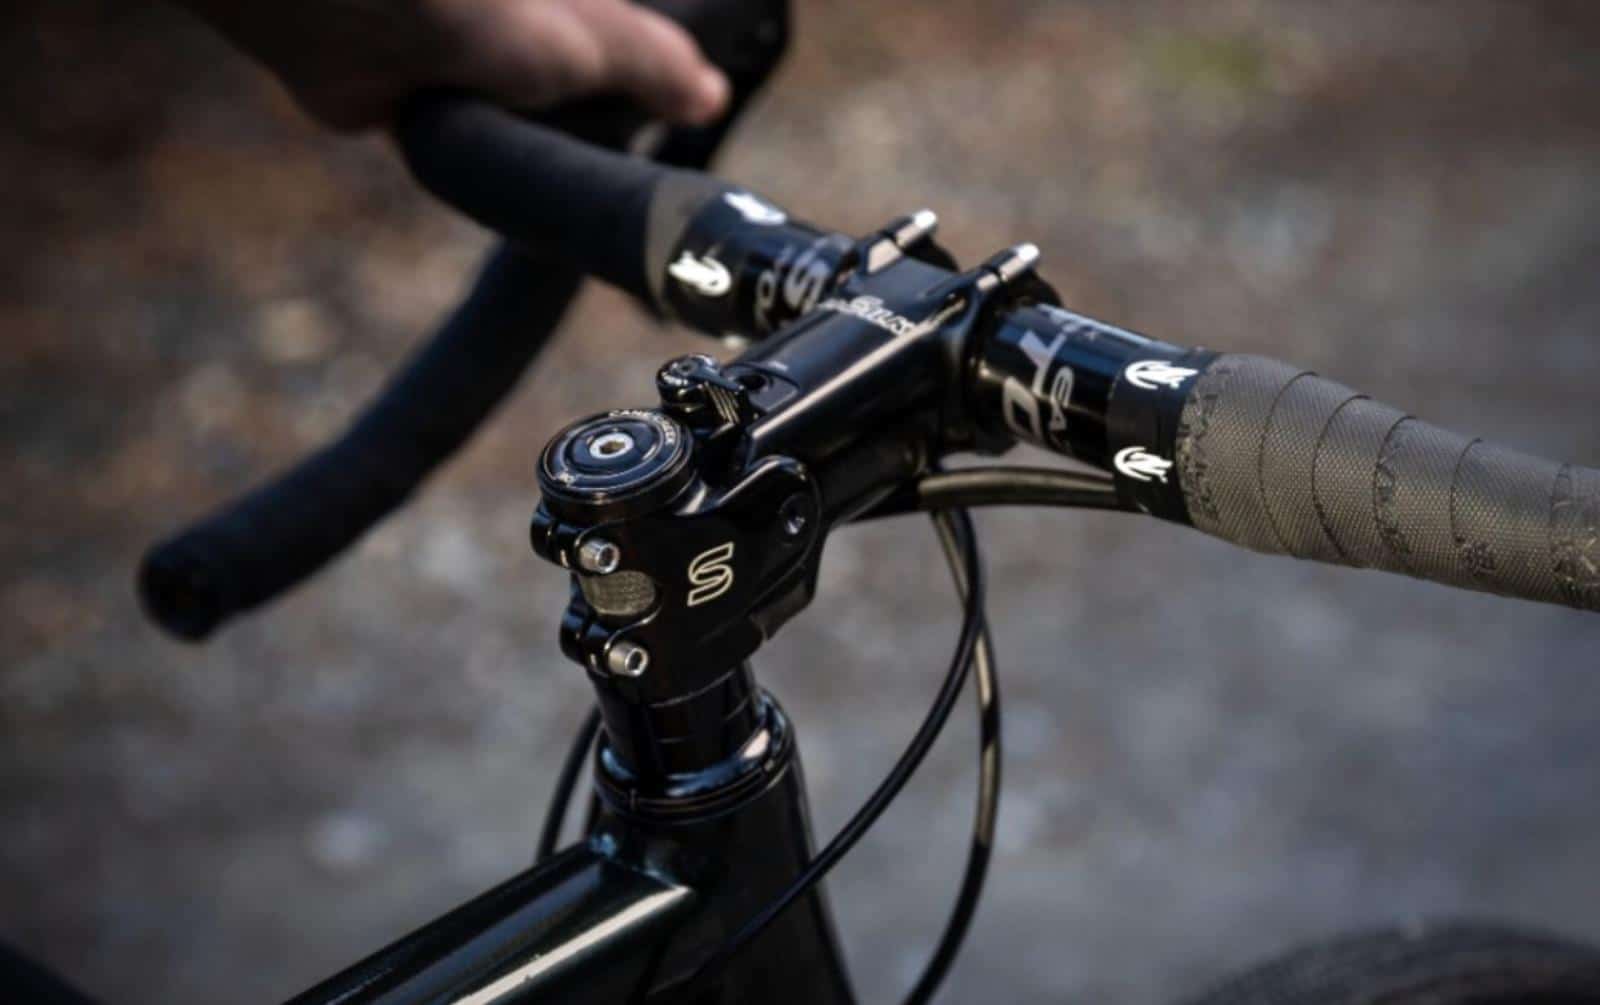 The innovative eeSilk bicycle stem from Cane Creek enhances cyclists' comfort